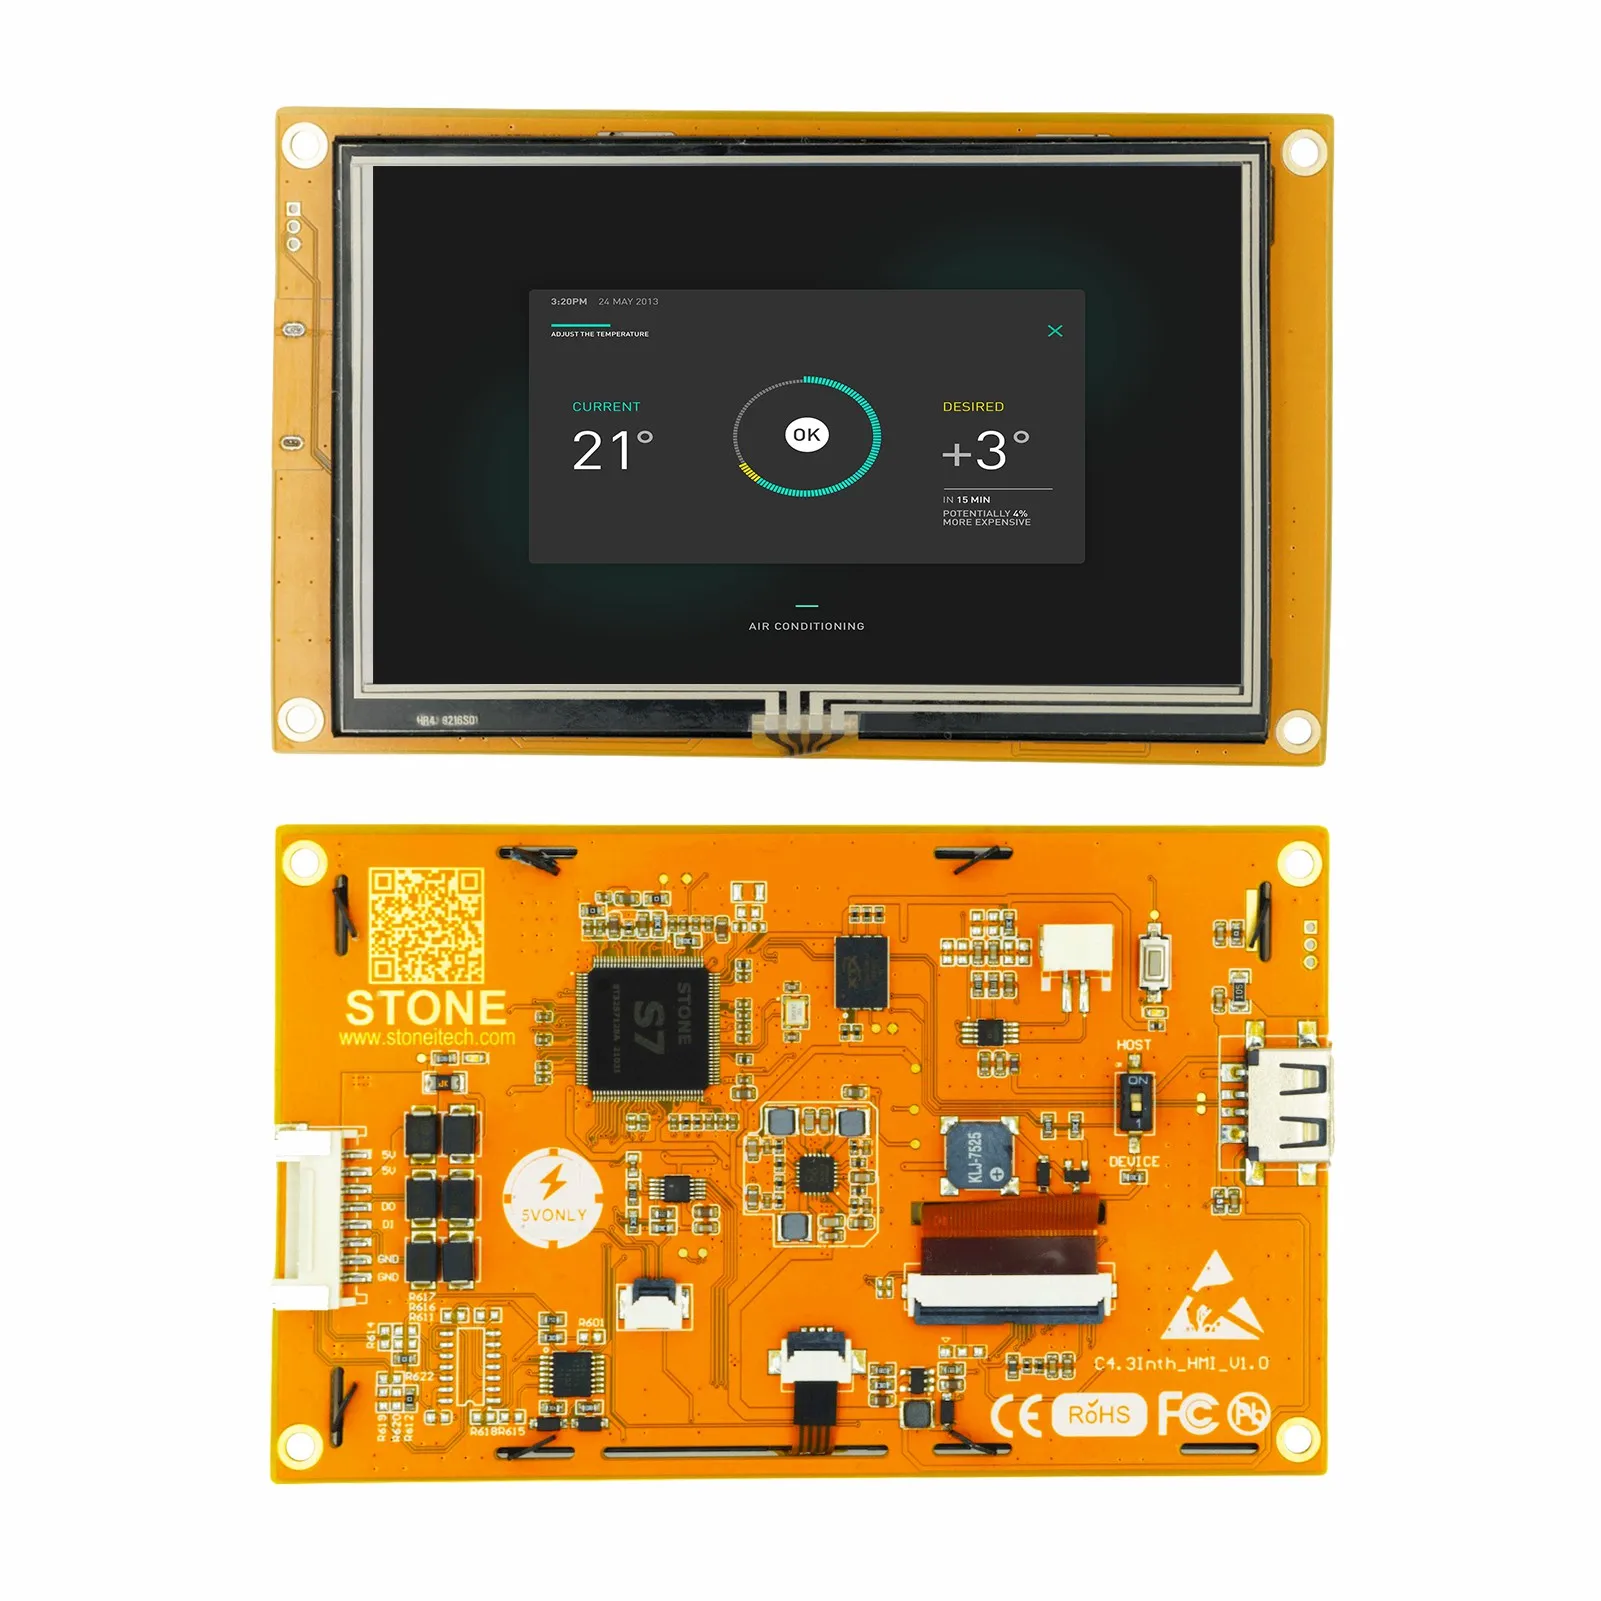 4.3 Inch HMI Graphic Touch Screen with Controller + Program + UART Serial Interface for Industrial Equipment C5